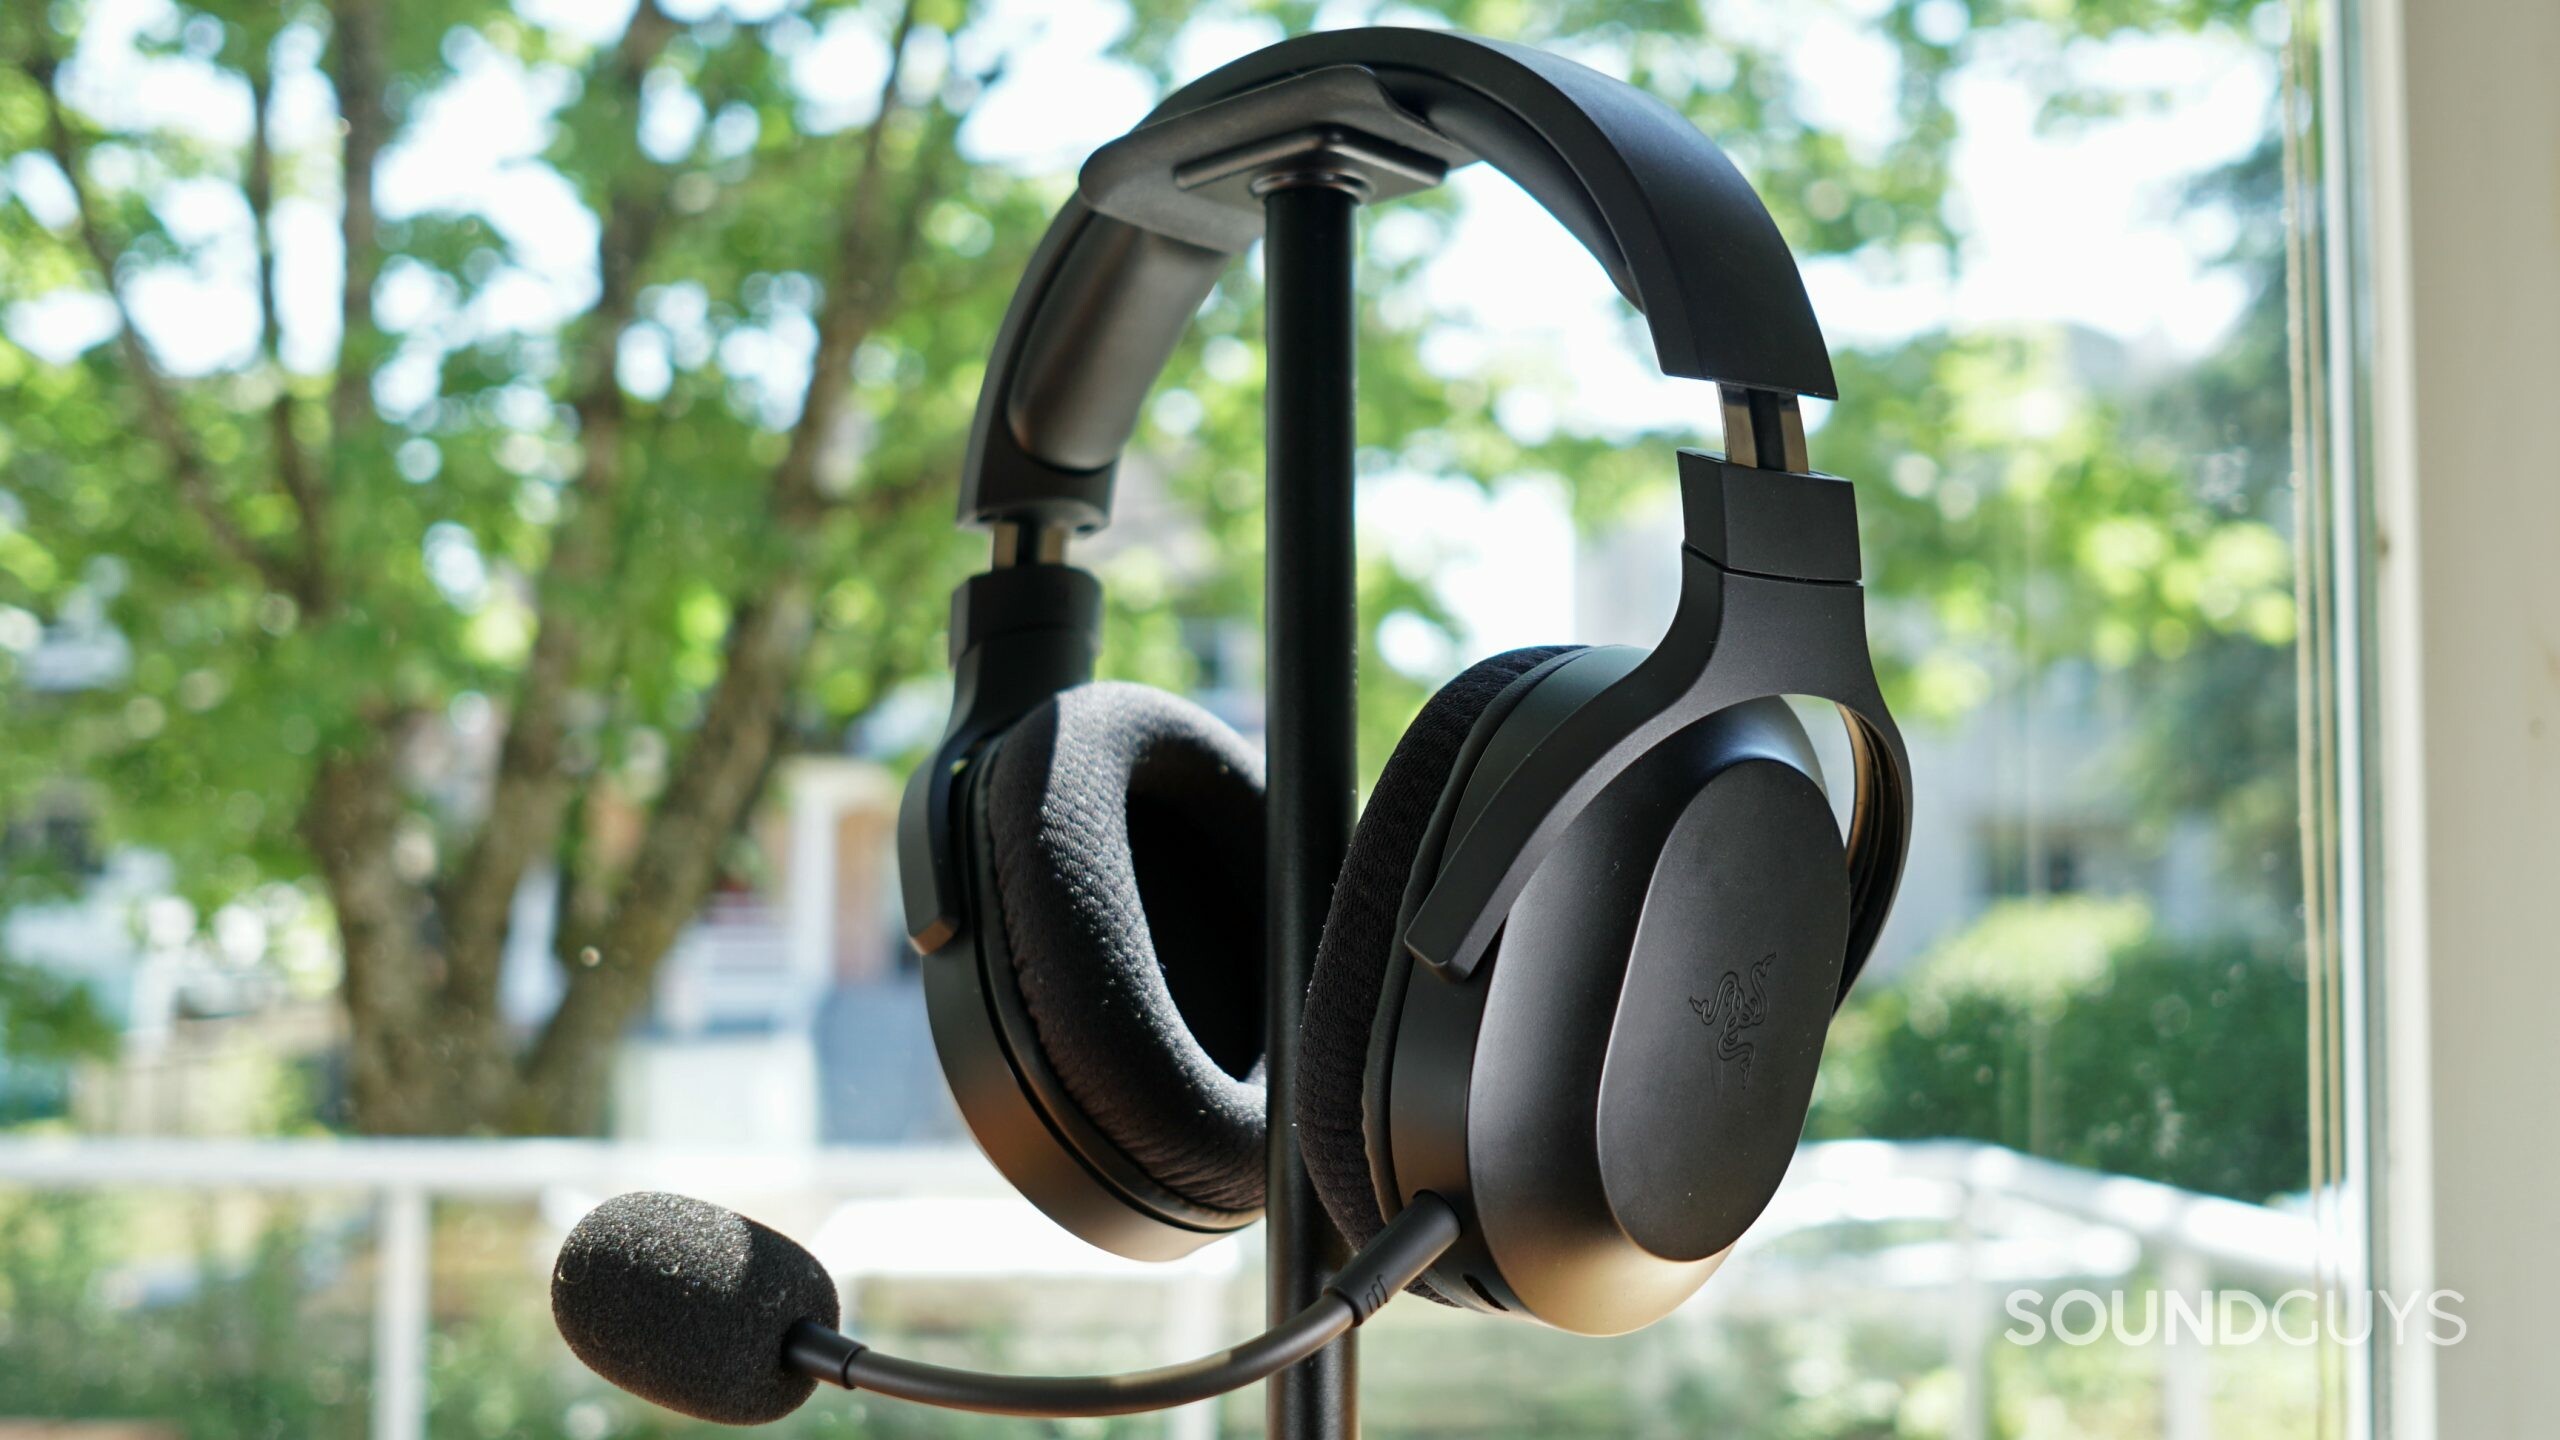 The Razer Barracuda X sits on a headphone stand in front of a window